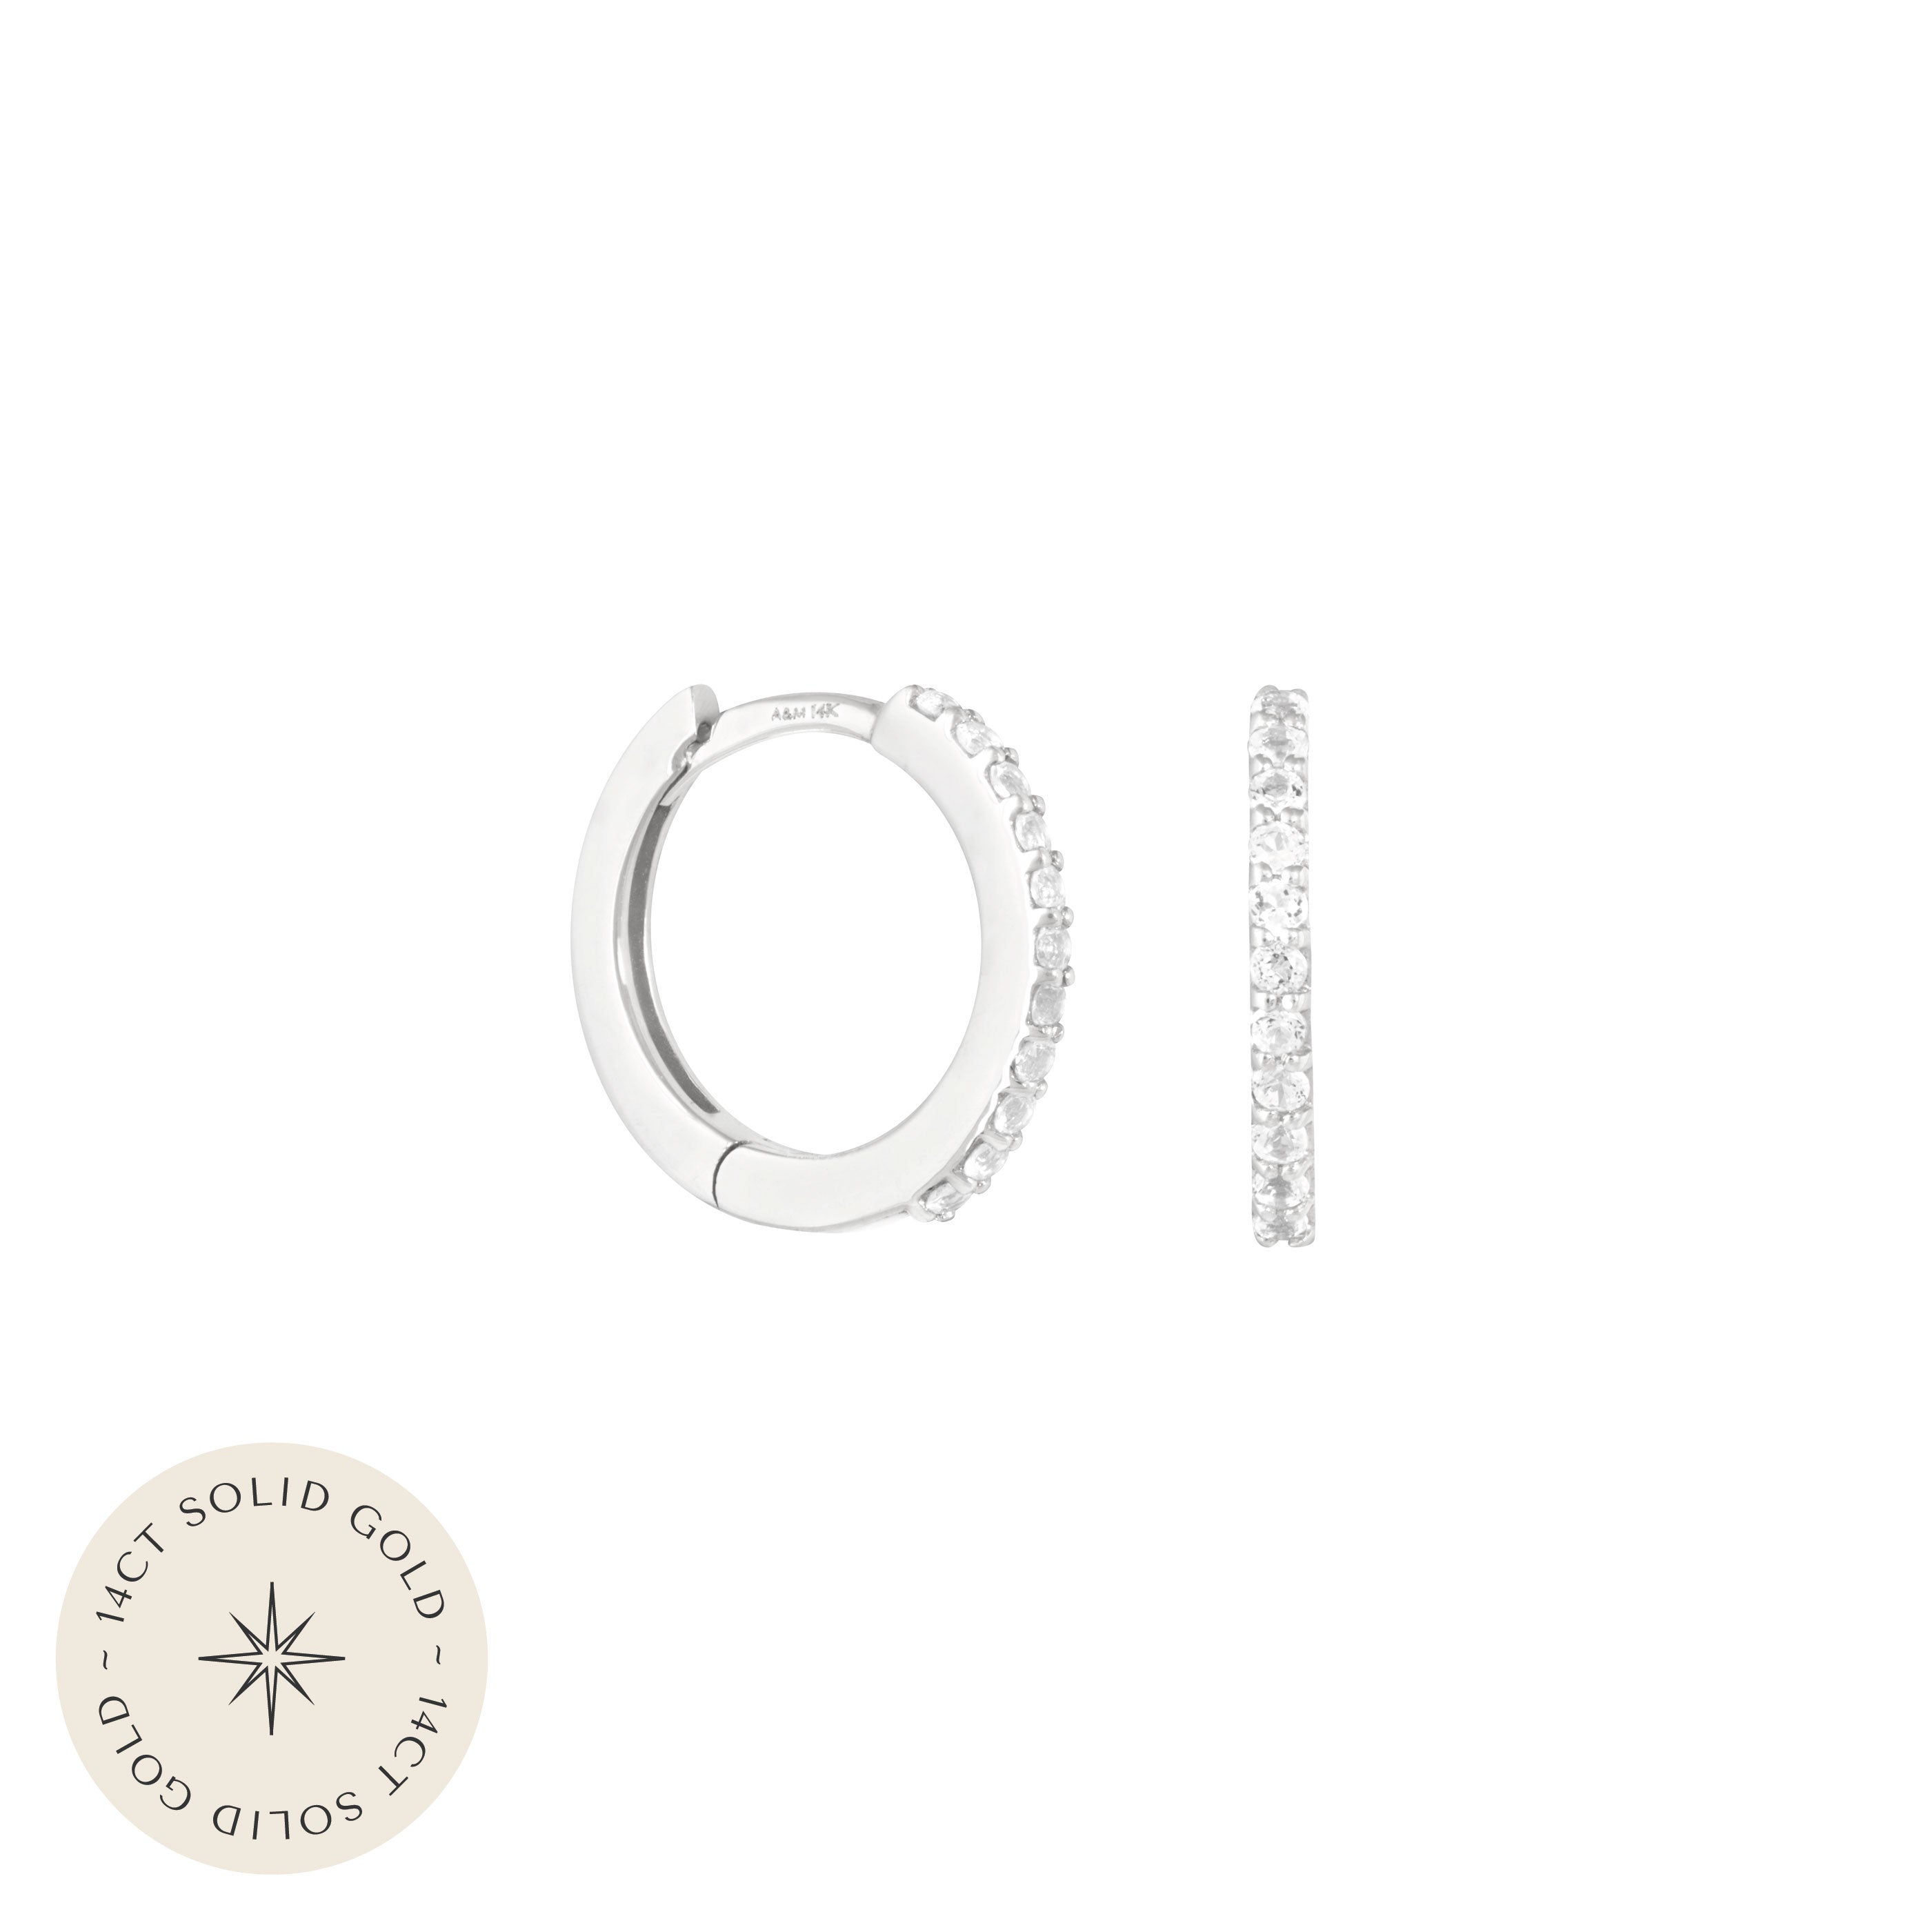 Topaz Hoops in Solid White Gold with 14CT solid gold label